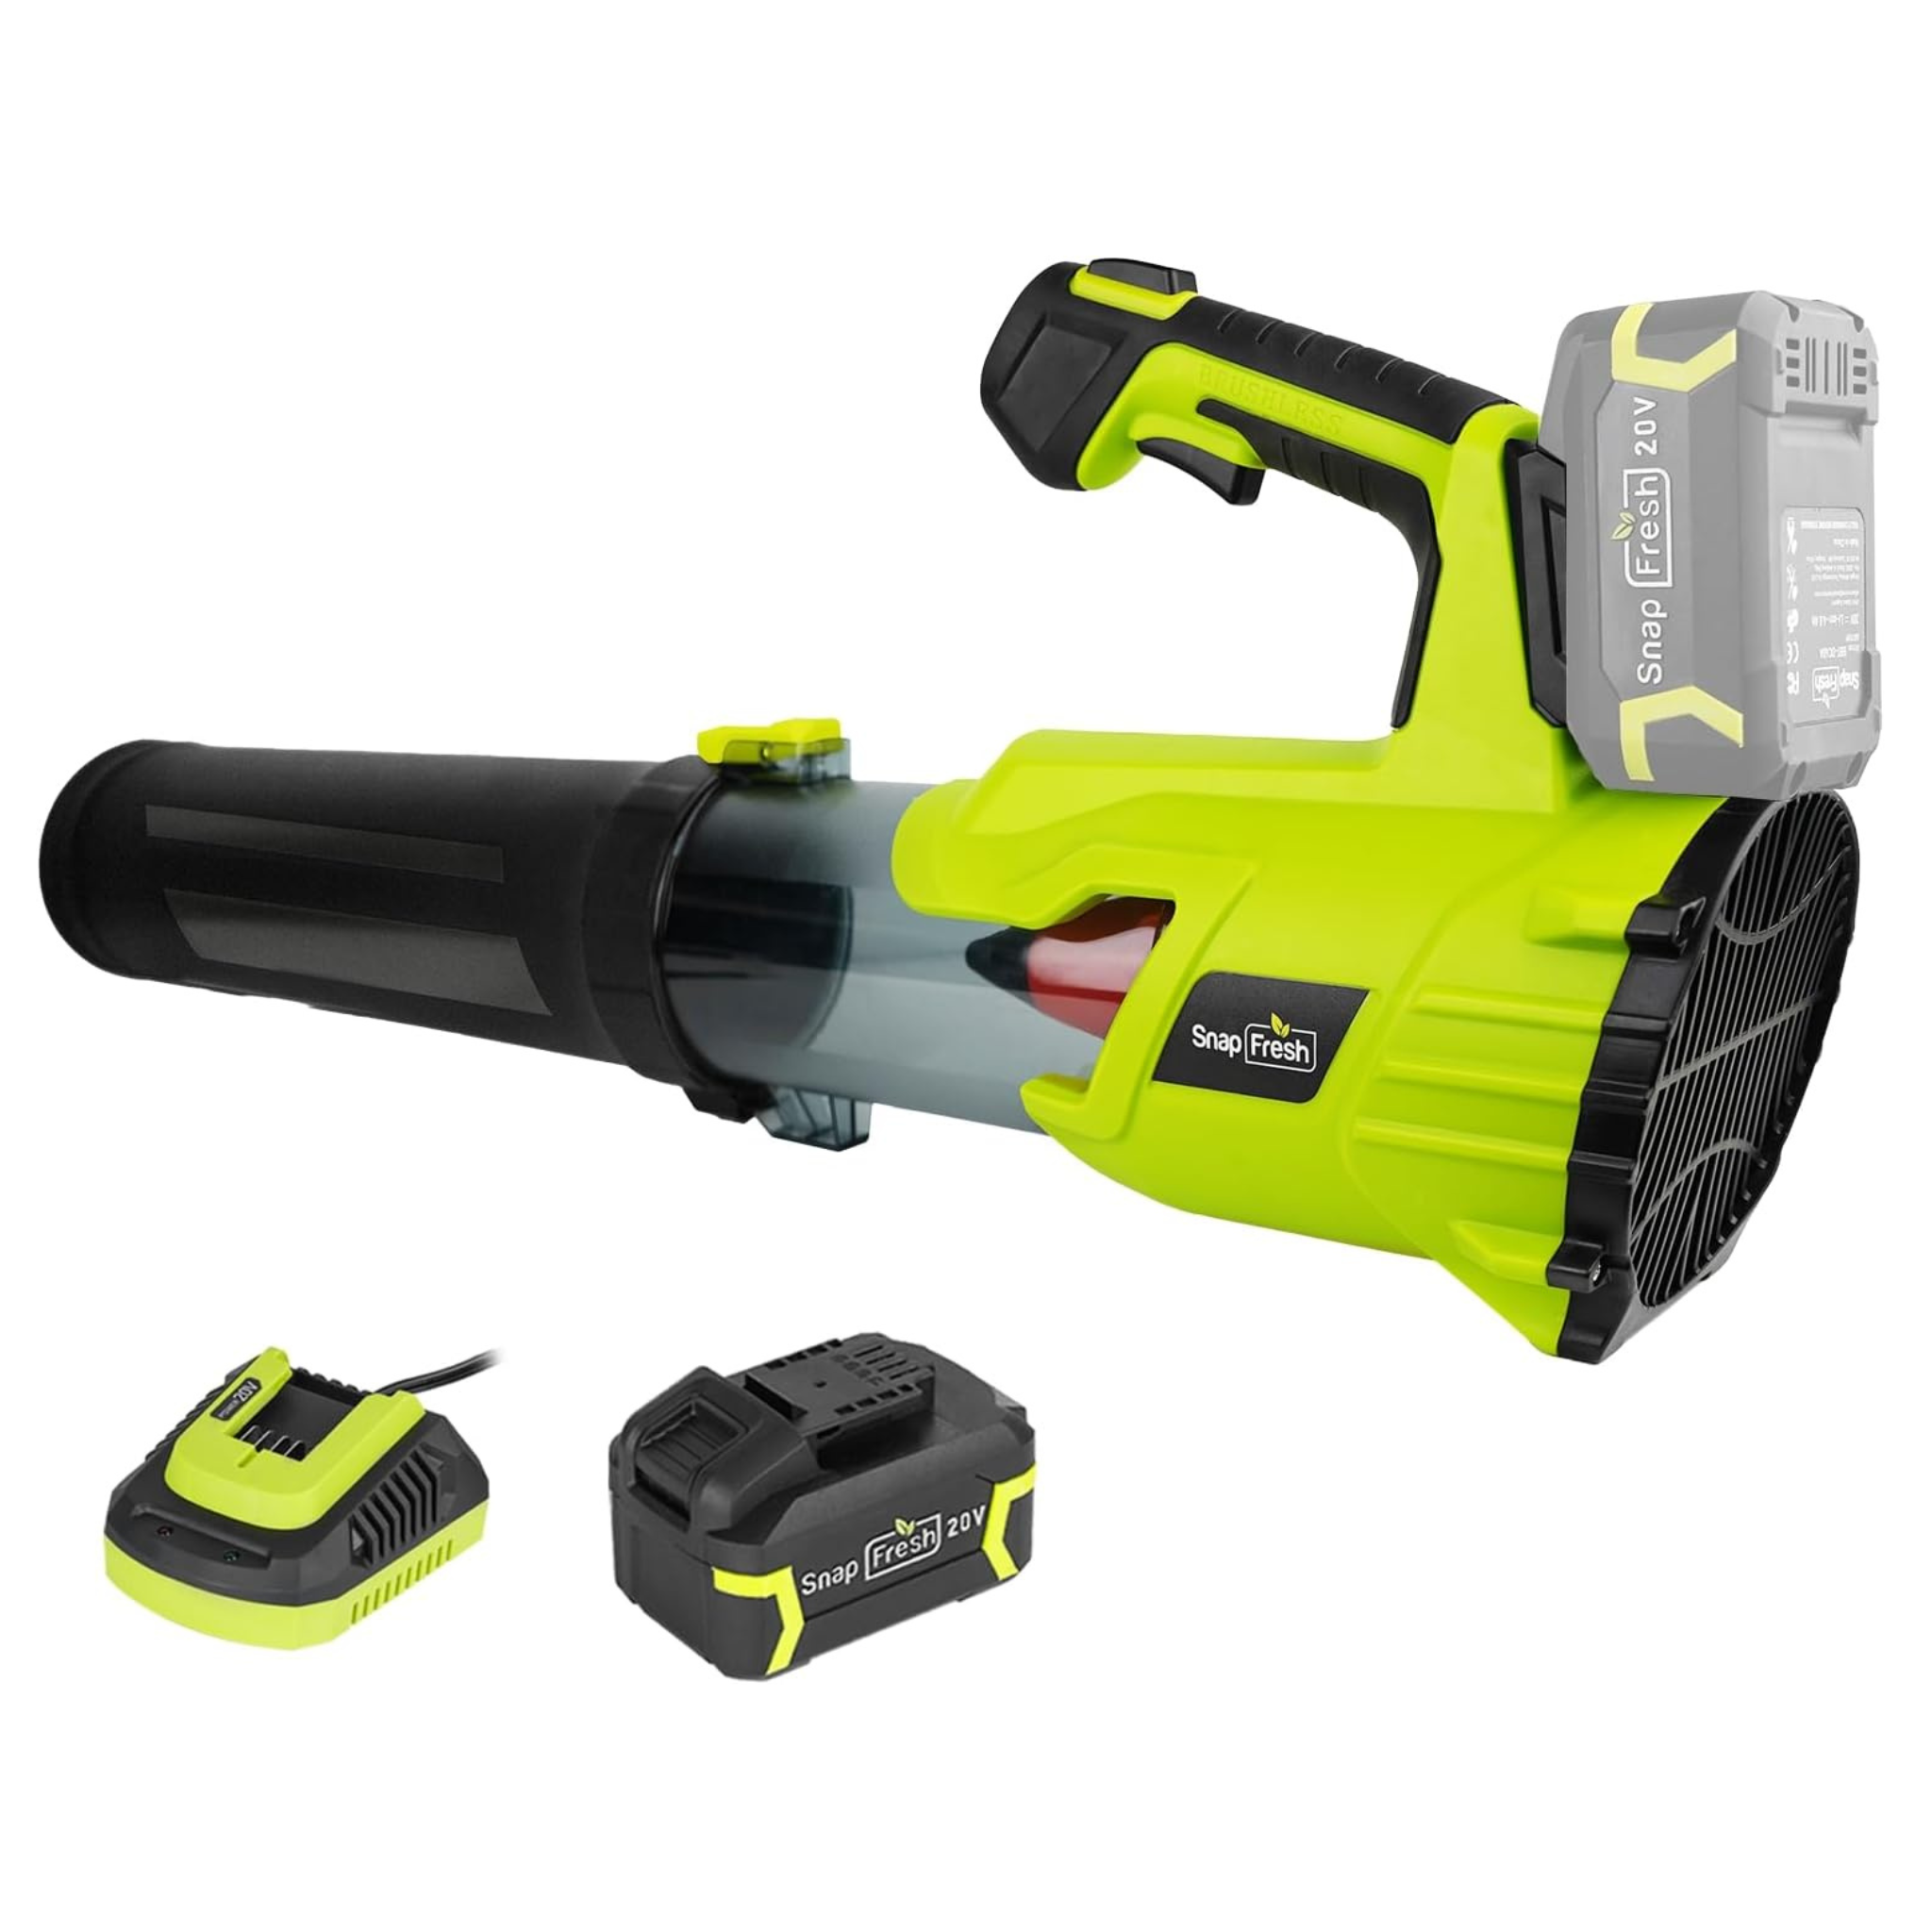 SnapFresh 550CFM Brushless Electric Leaf Blower with 4.0 Ah Battery